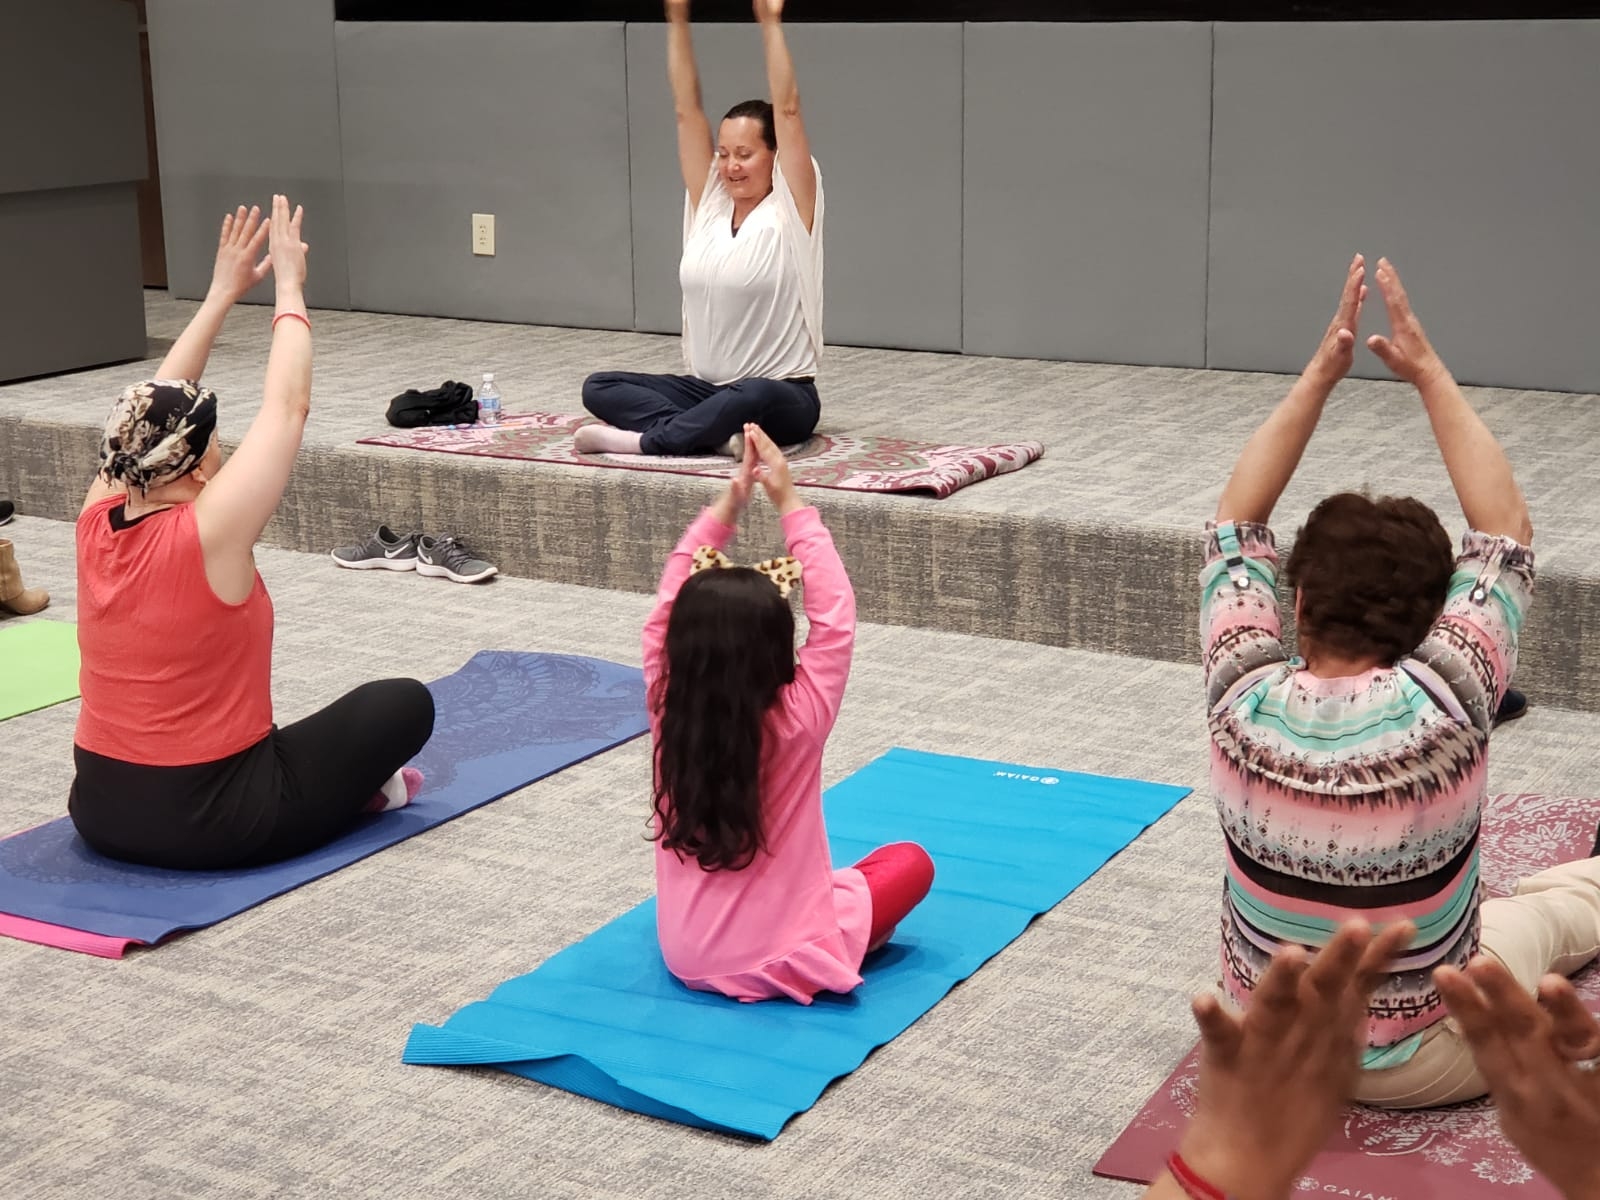 Participants finding peace through Yoga and Meditation